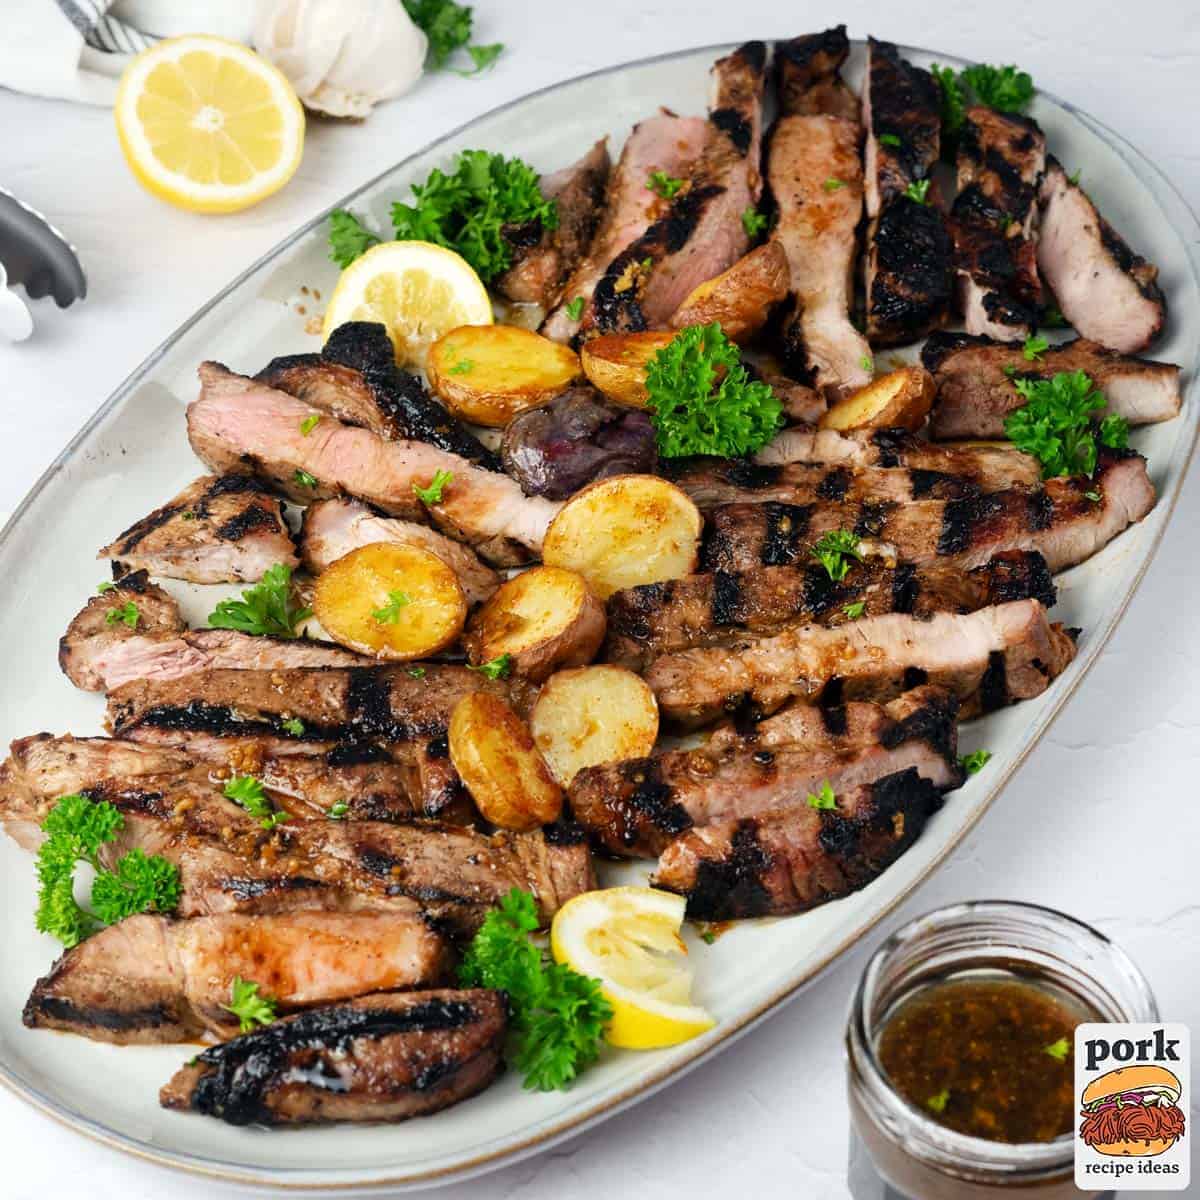 grilled pork steak sliced on a plate with potatoes, herbs and lemon wedges